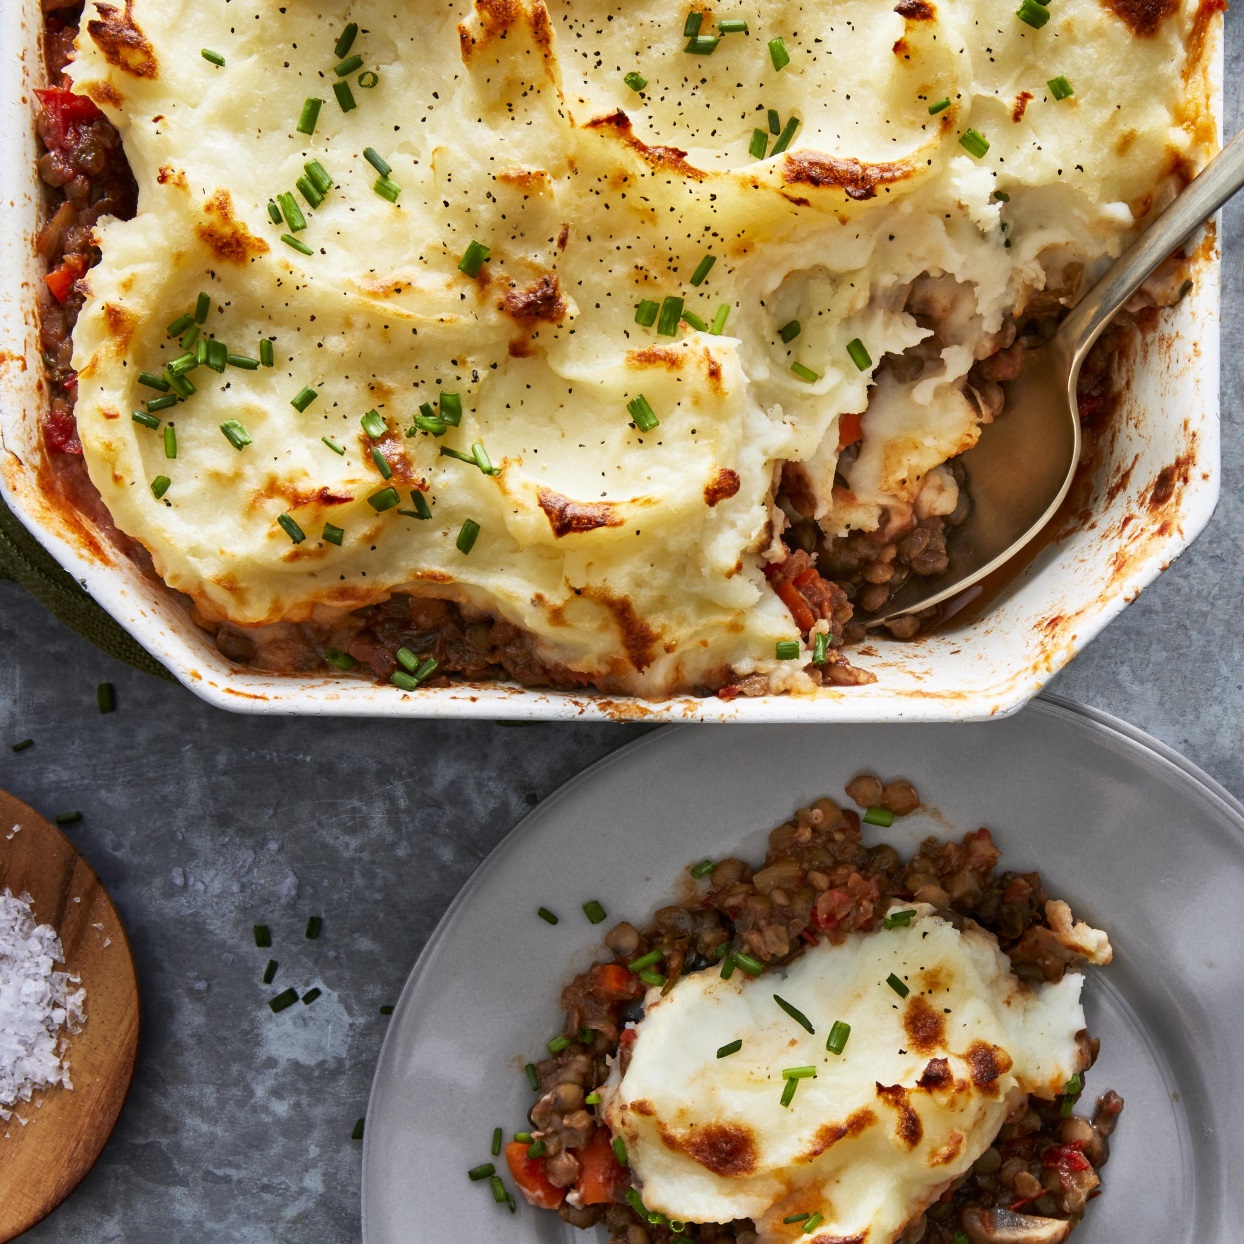 <p>Lentils take the place of ground meat and vegan butter adds creaminess to the mashed potatoes in this easy vegan shepherd's pie recipe. If you want to cut down on the cooking time, use precooked lentils and omit most of the vegetable broth, adding some in only if the mixture seems dry.</p>
                          